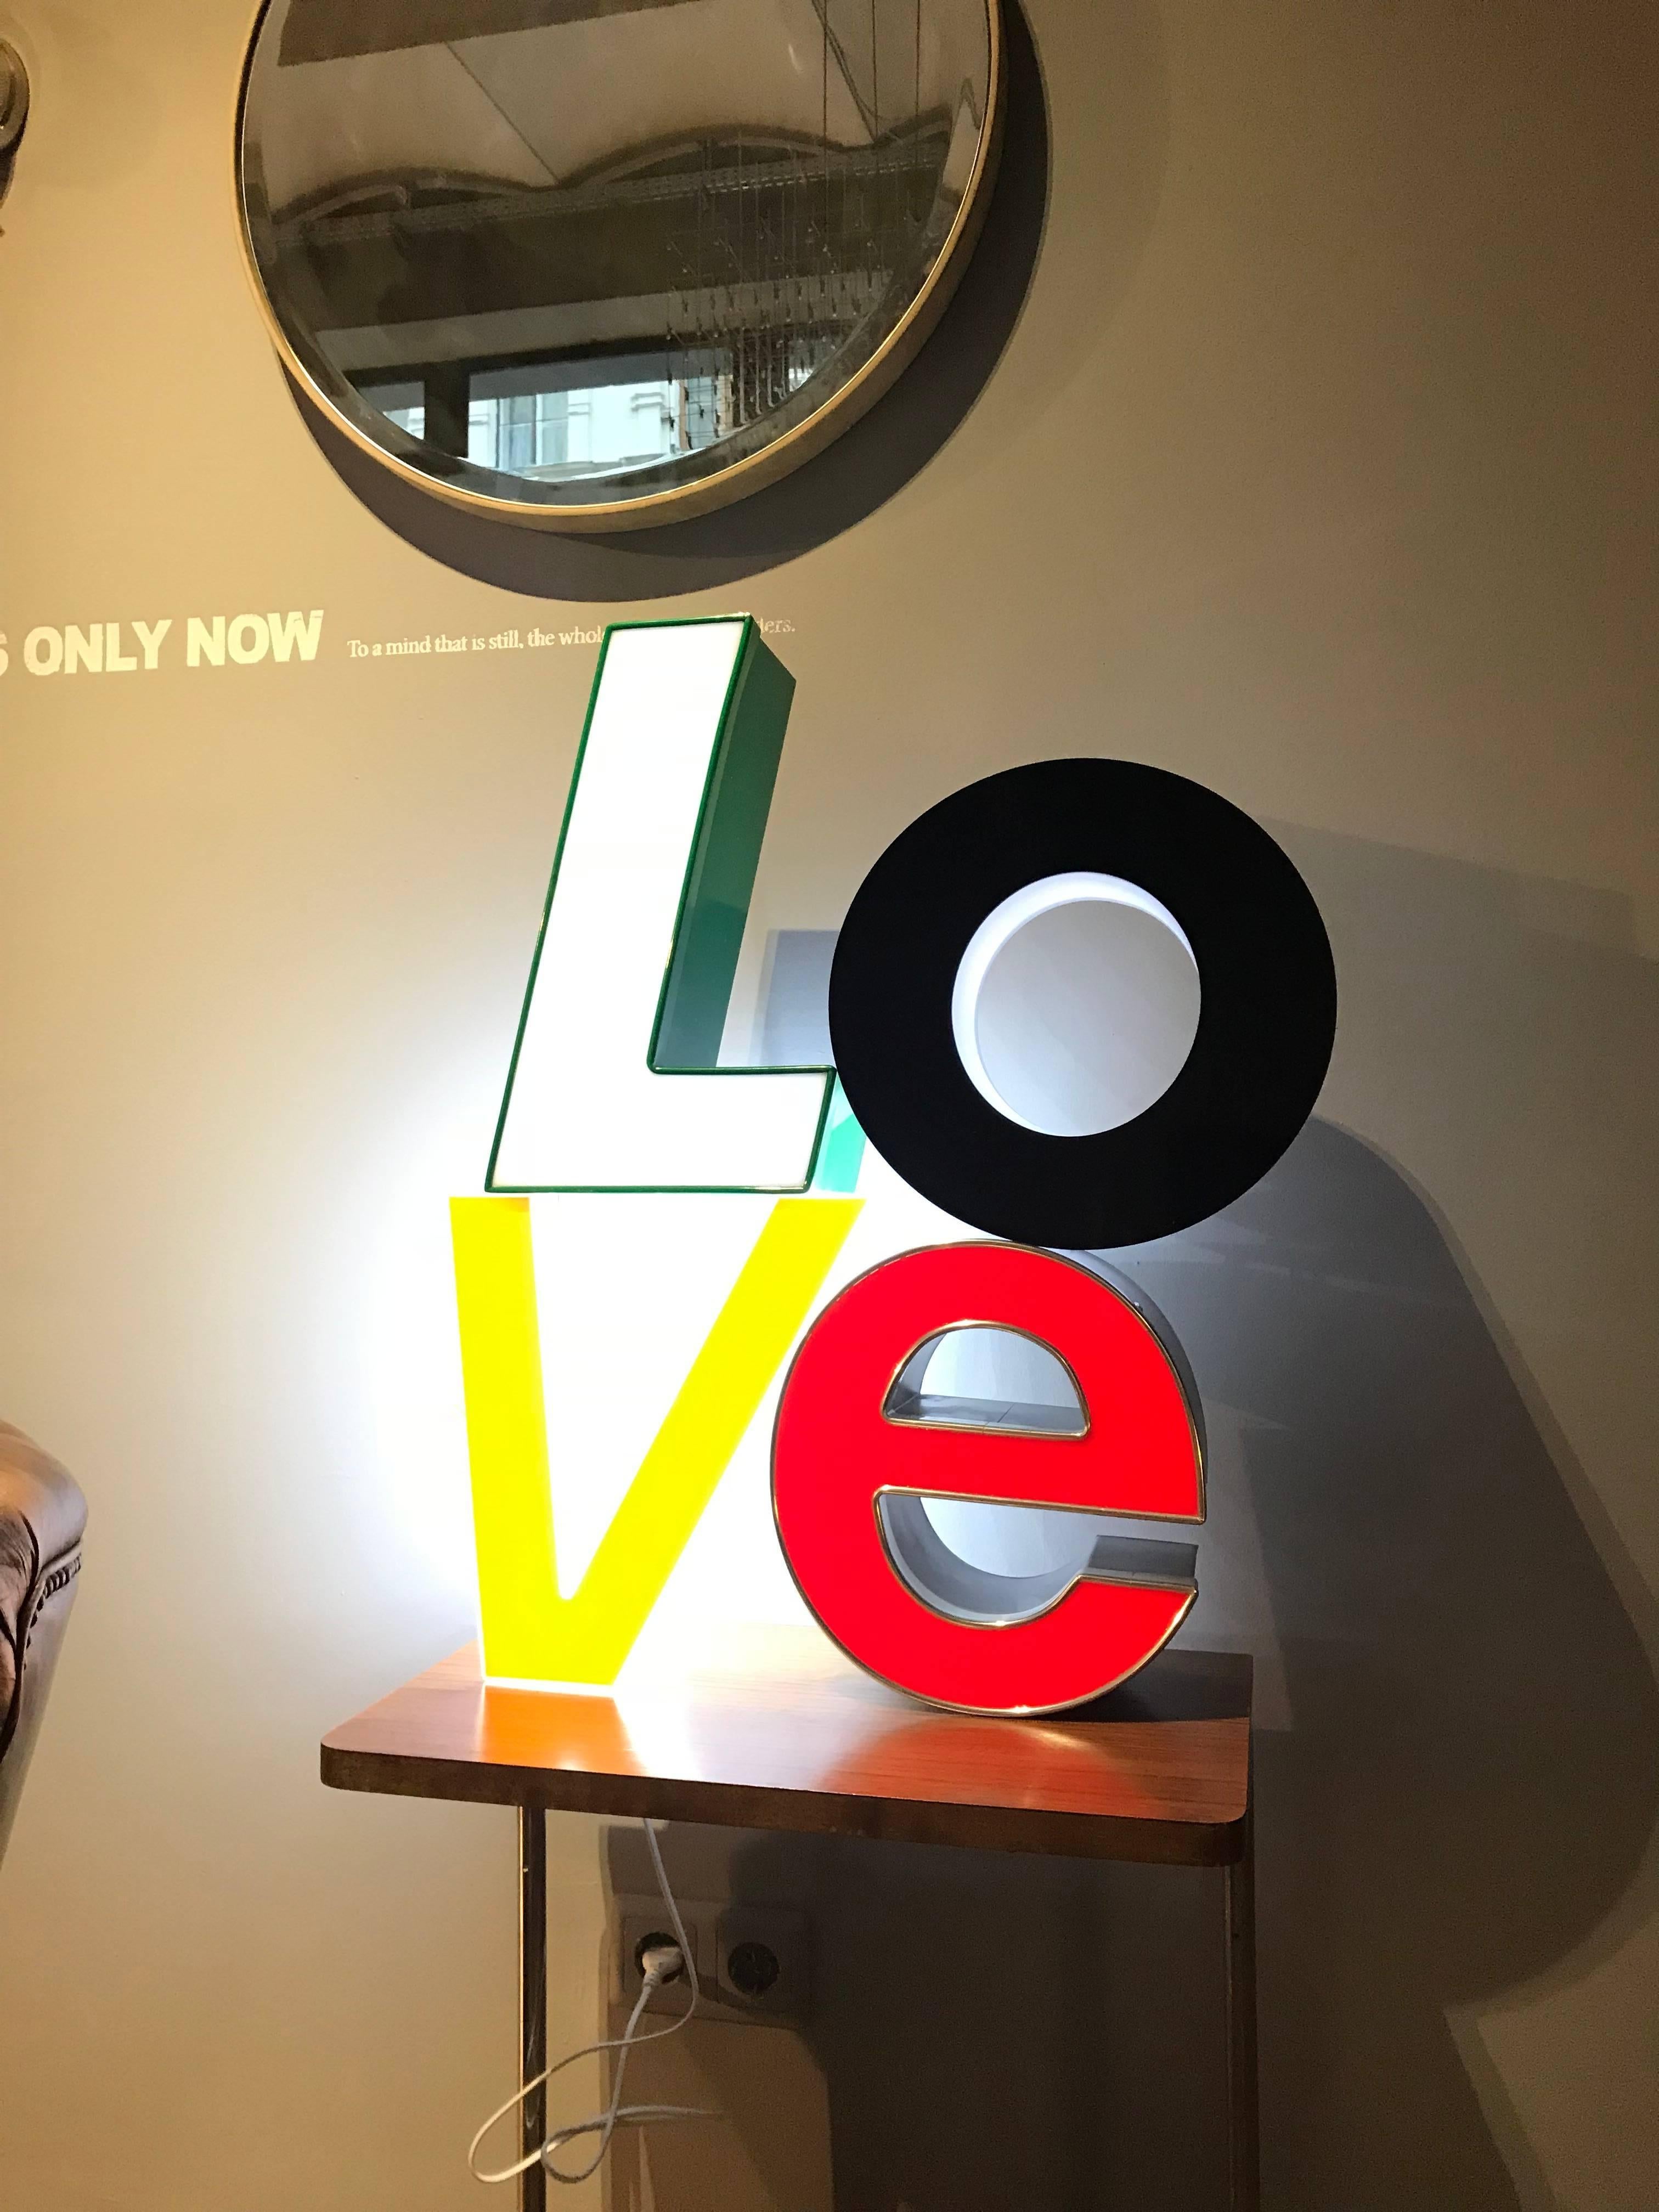 Mid-Century Modern 3D LOVE Lighting Sign in Style of Robert Indiana, Arty Letter Sculpture